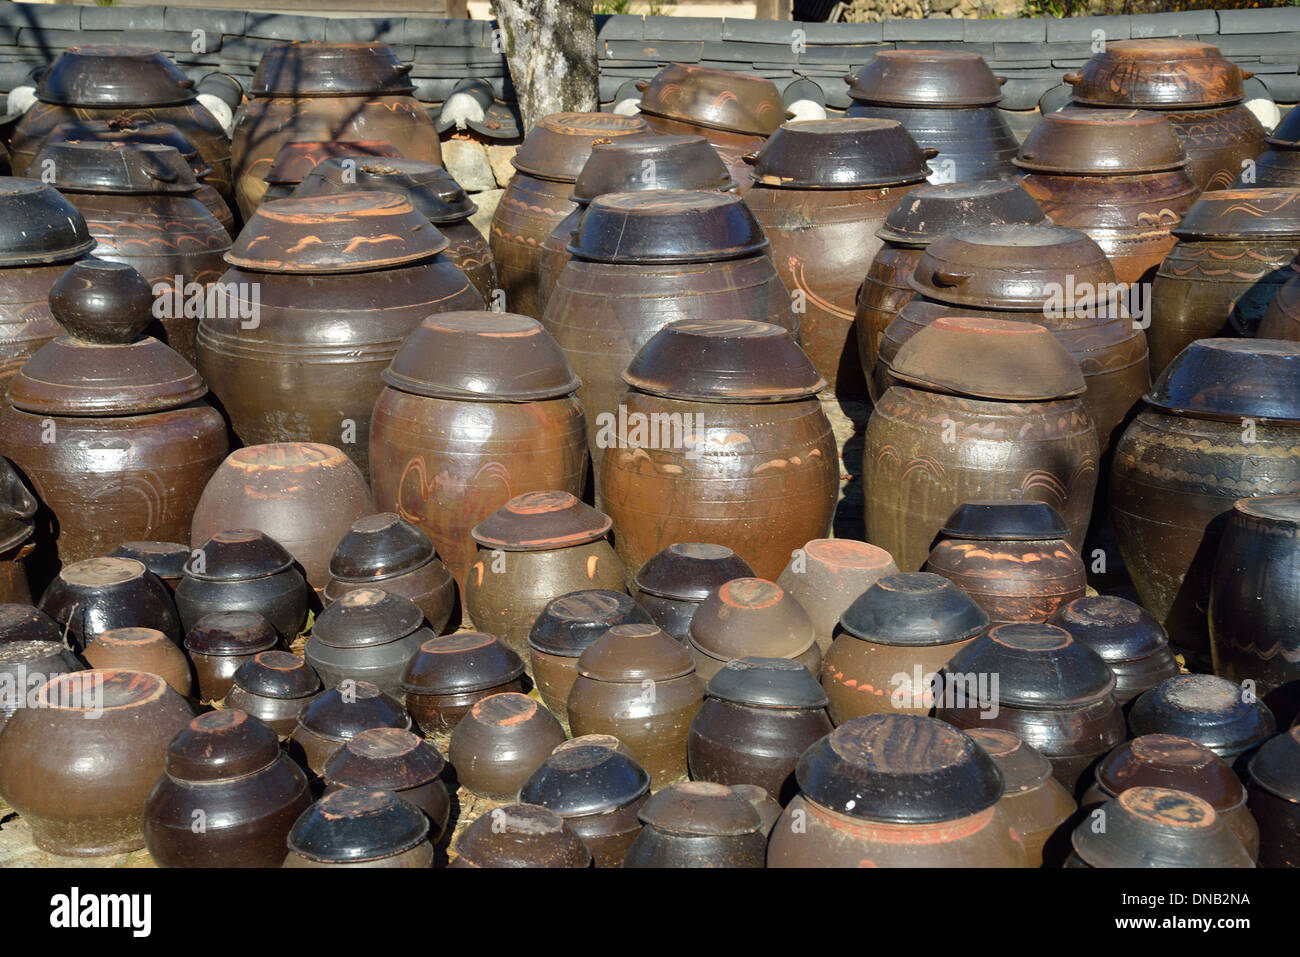 Korean Traditional platform for crocks of sauces and condiments Stock Photo